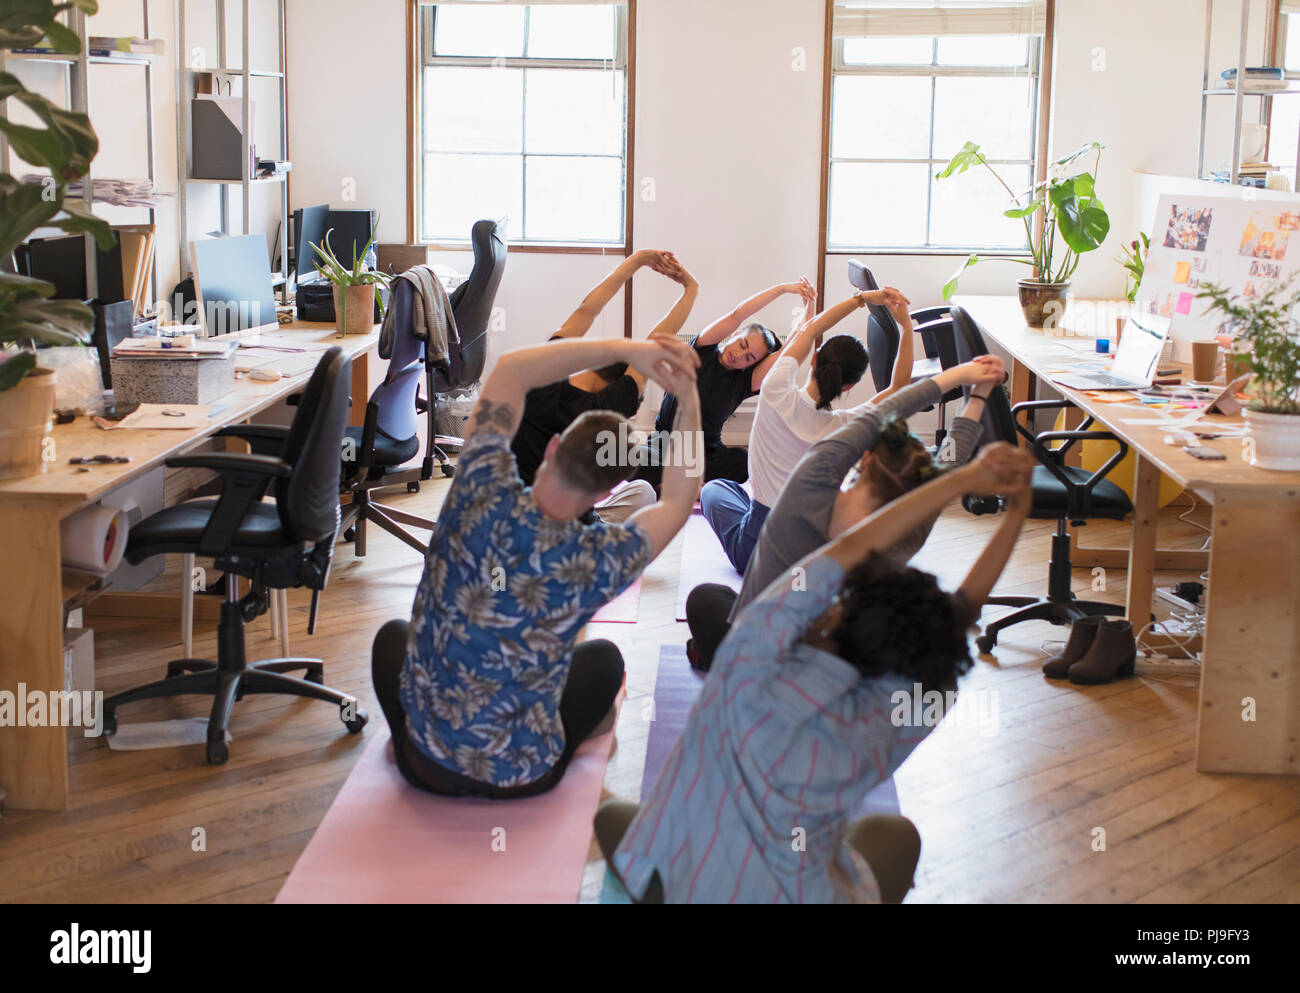 Creative business people stretching, pratiquant le yoga in office Banque D'Images